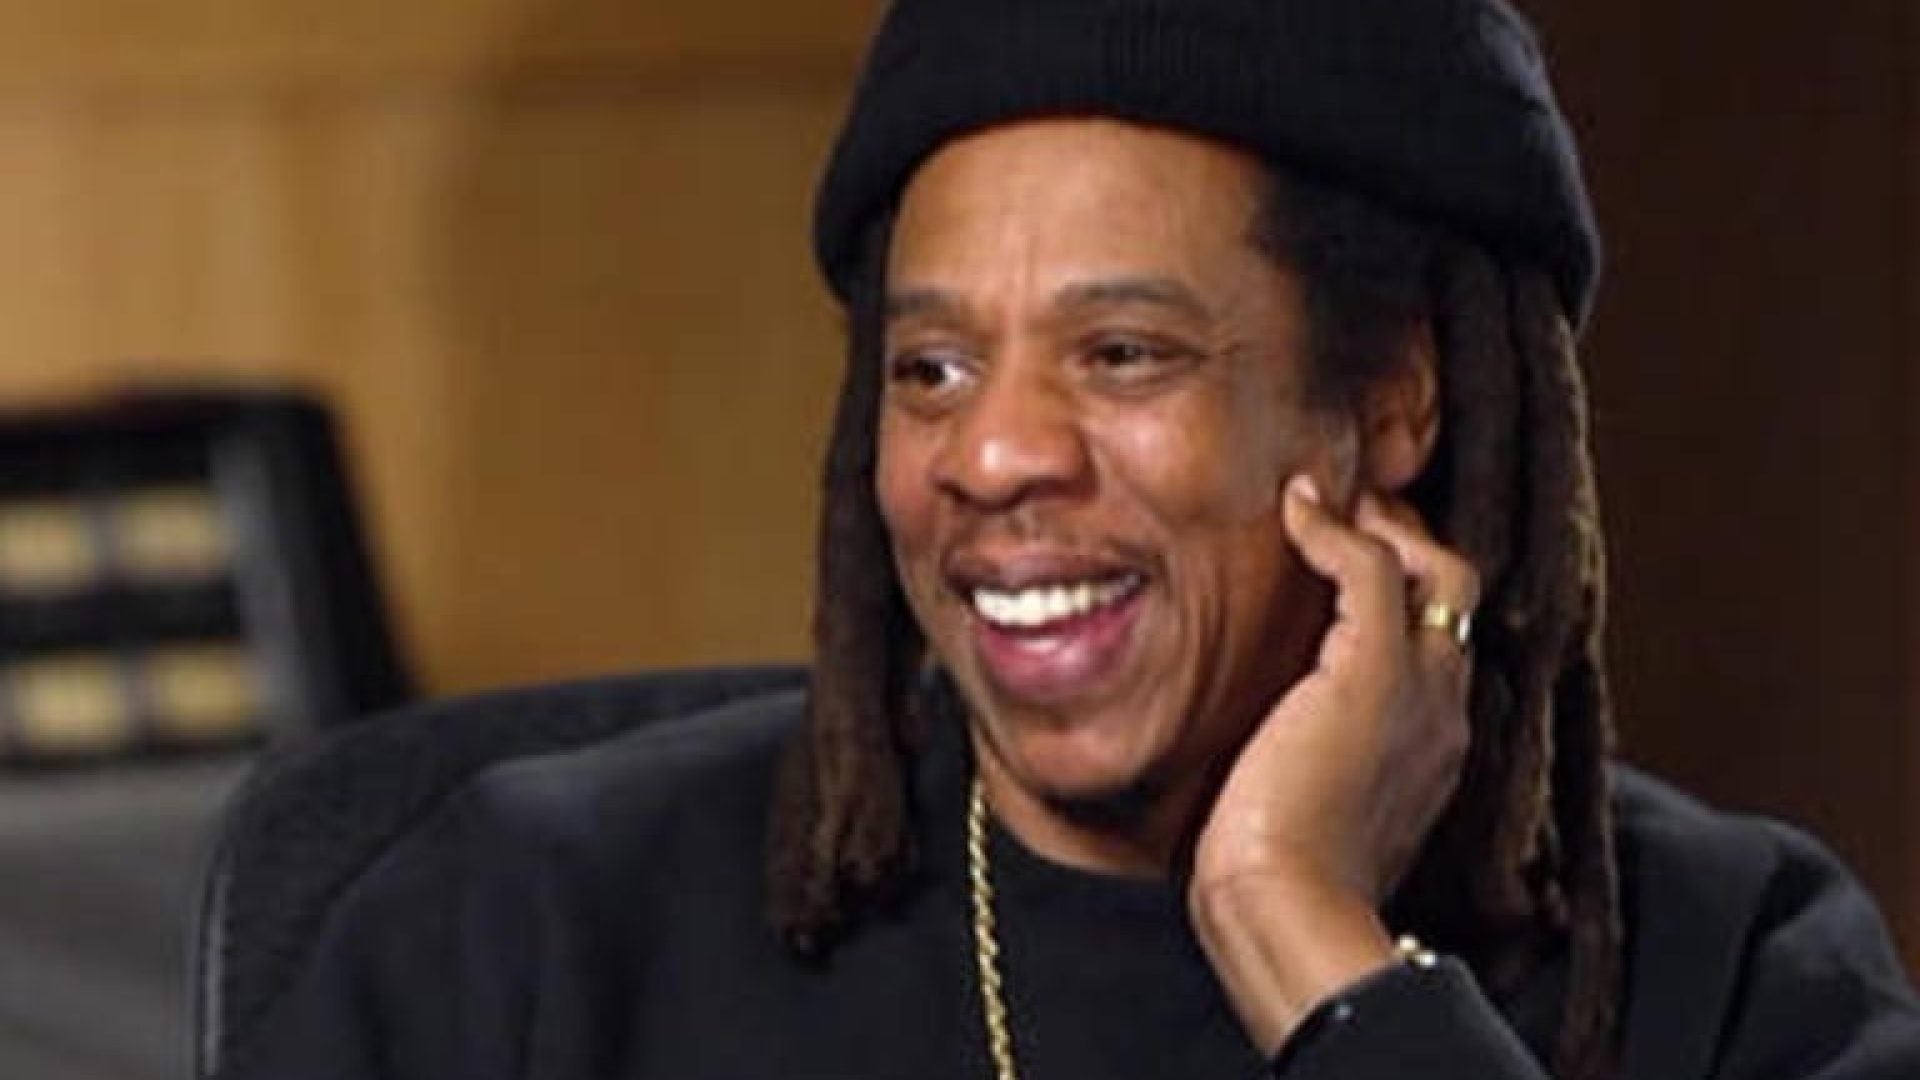 Jay Z Puts An End To The Dinner With Jay Z Or $500K Debate Once And For All